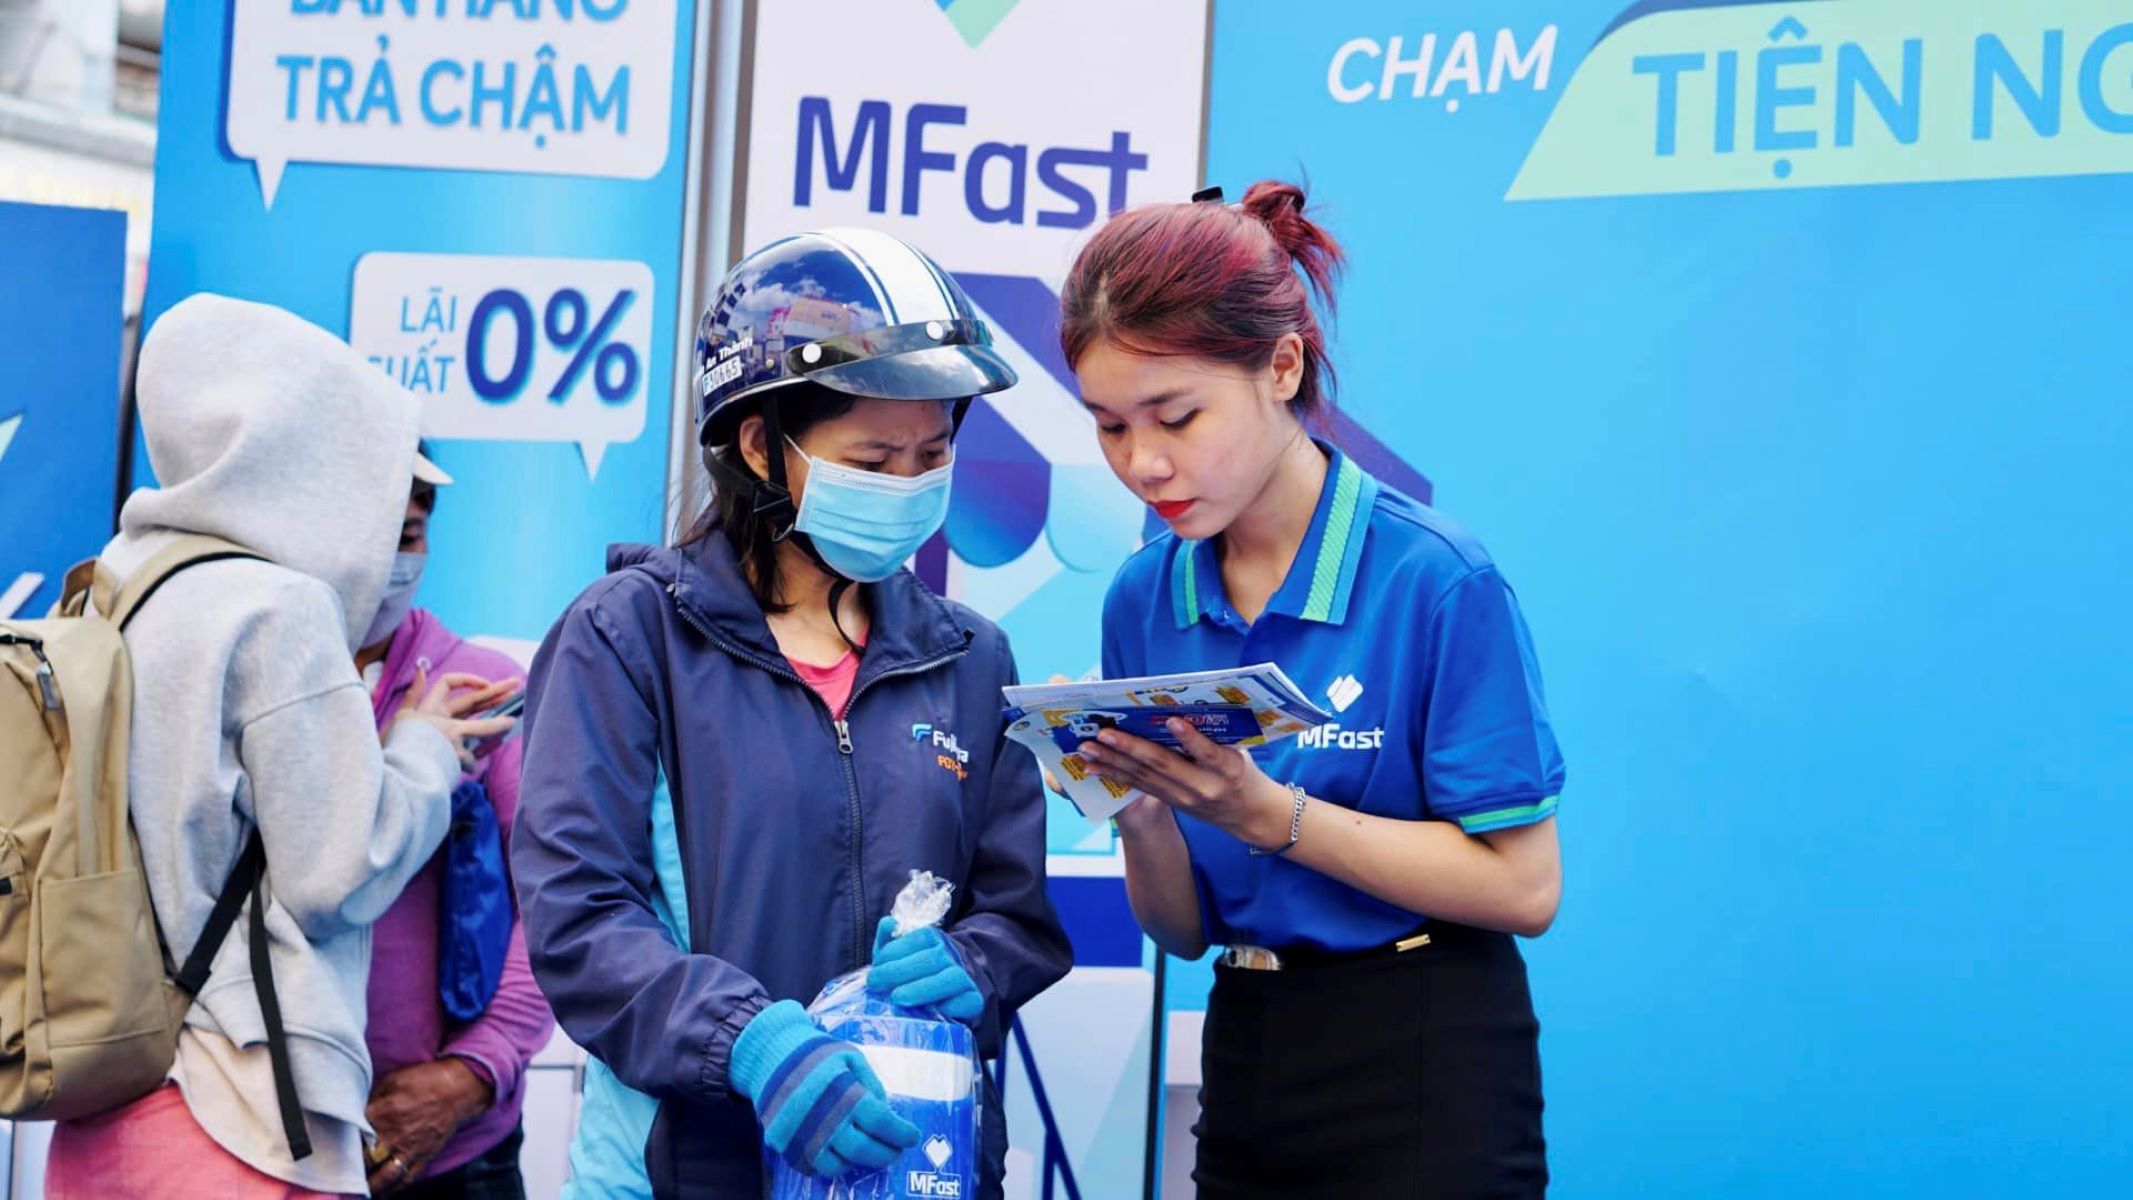 mfast-raises-6-million-in-series-a-funding-to-expand-financial-services-access-in-vietnam